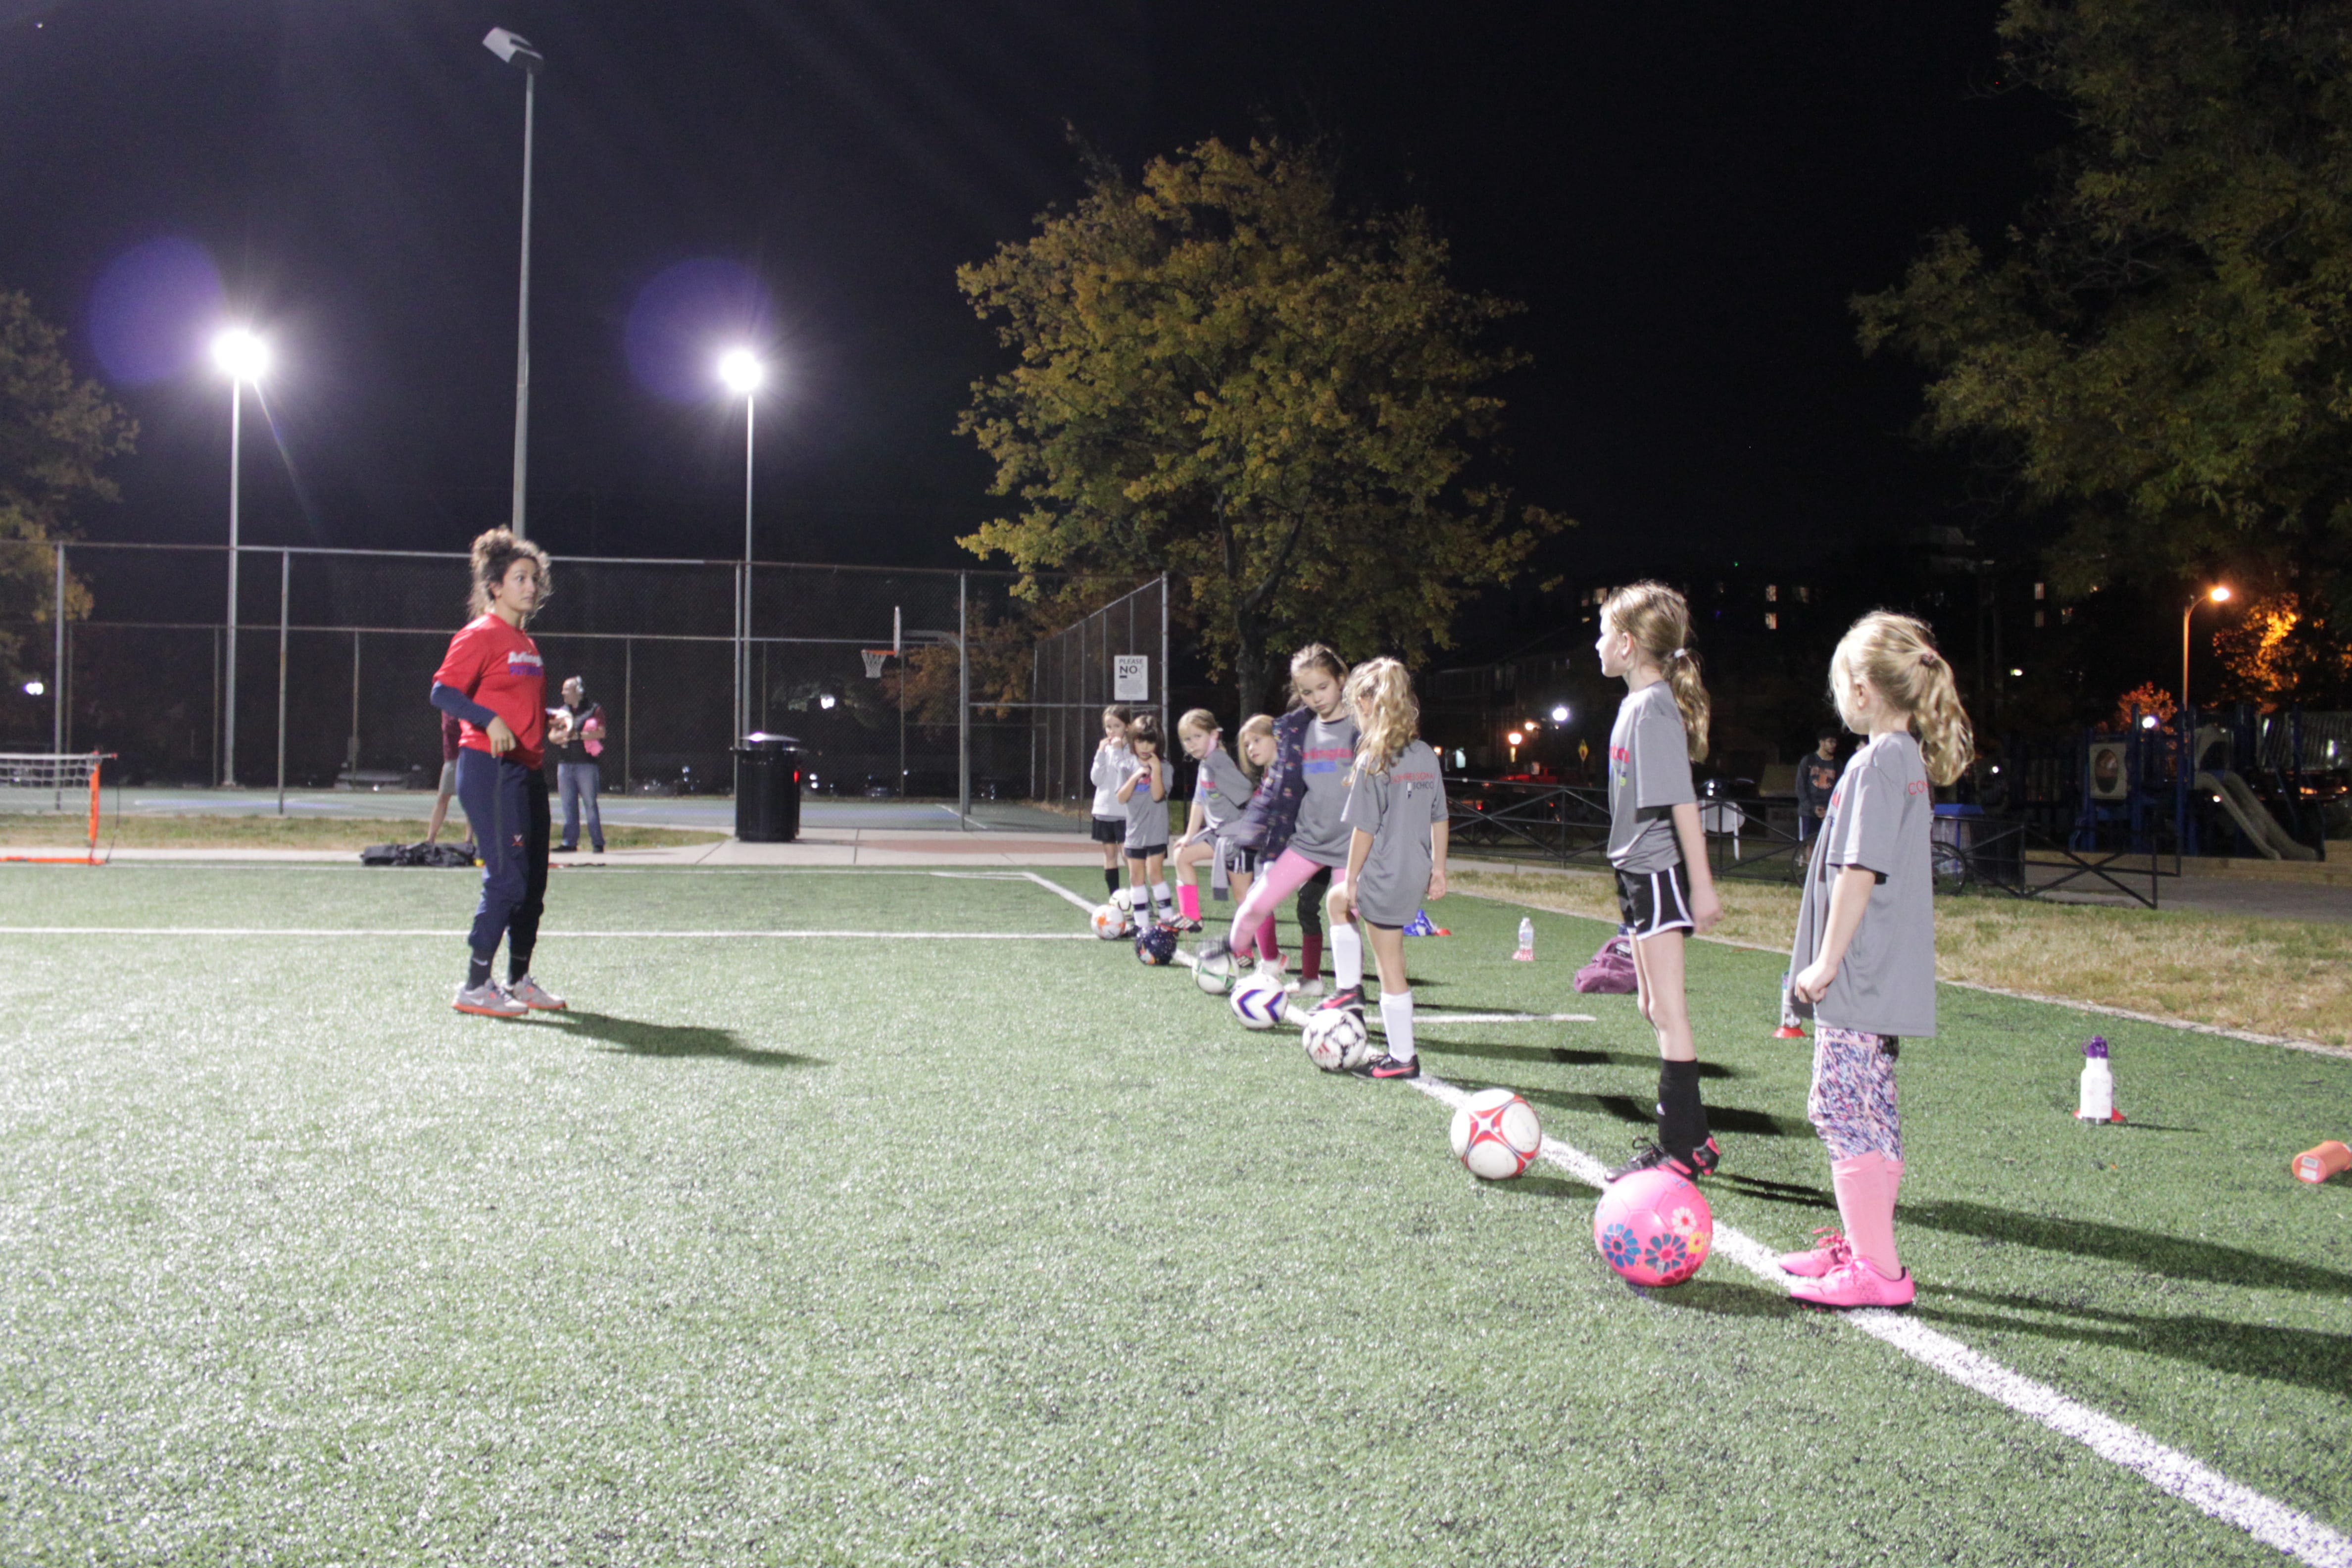 U7/U8 Futures Program Provides Development and Fun for Young Players